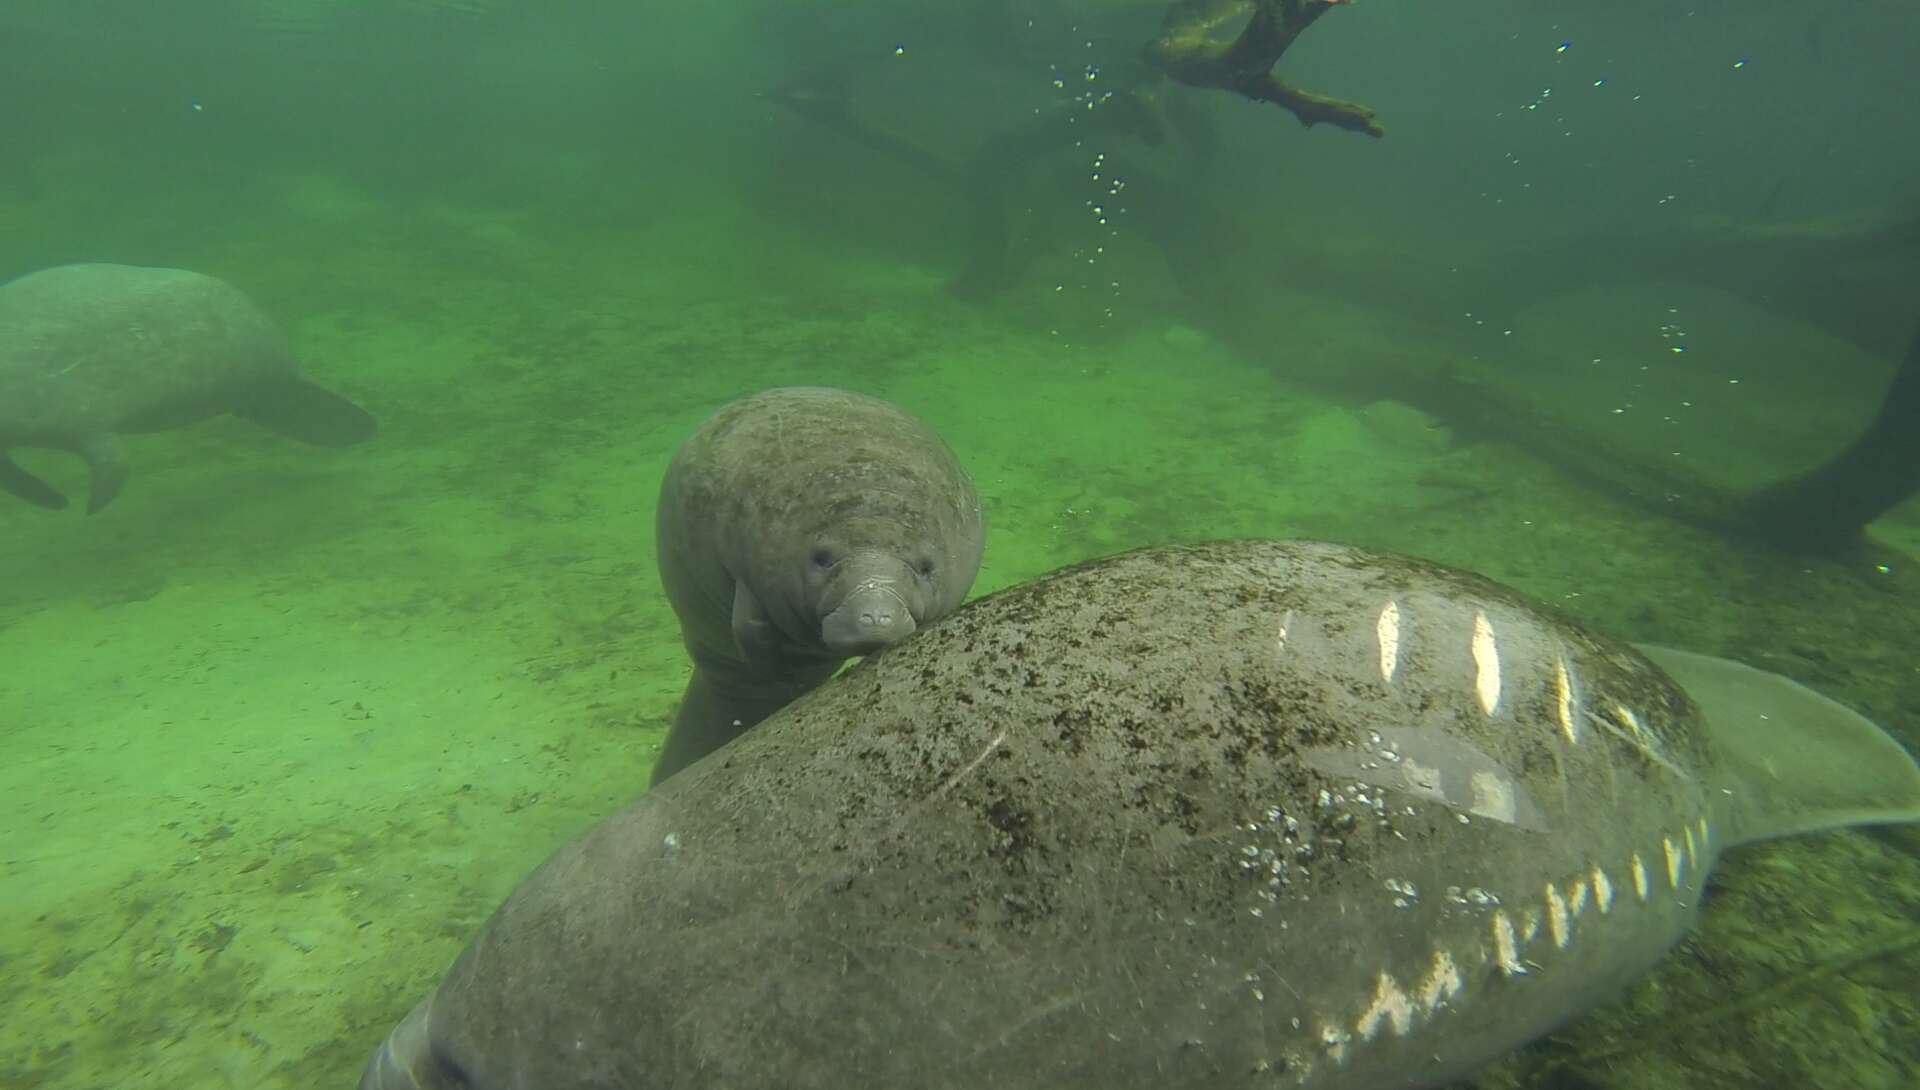 A mother and baby manatee in Florida